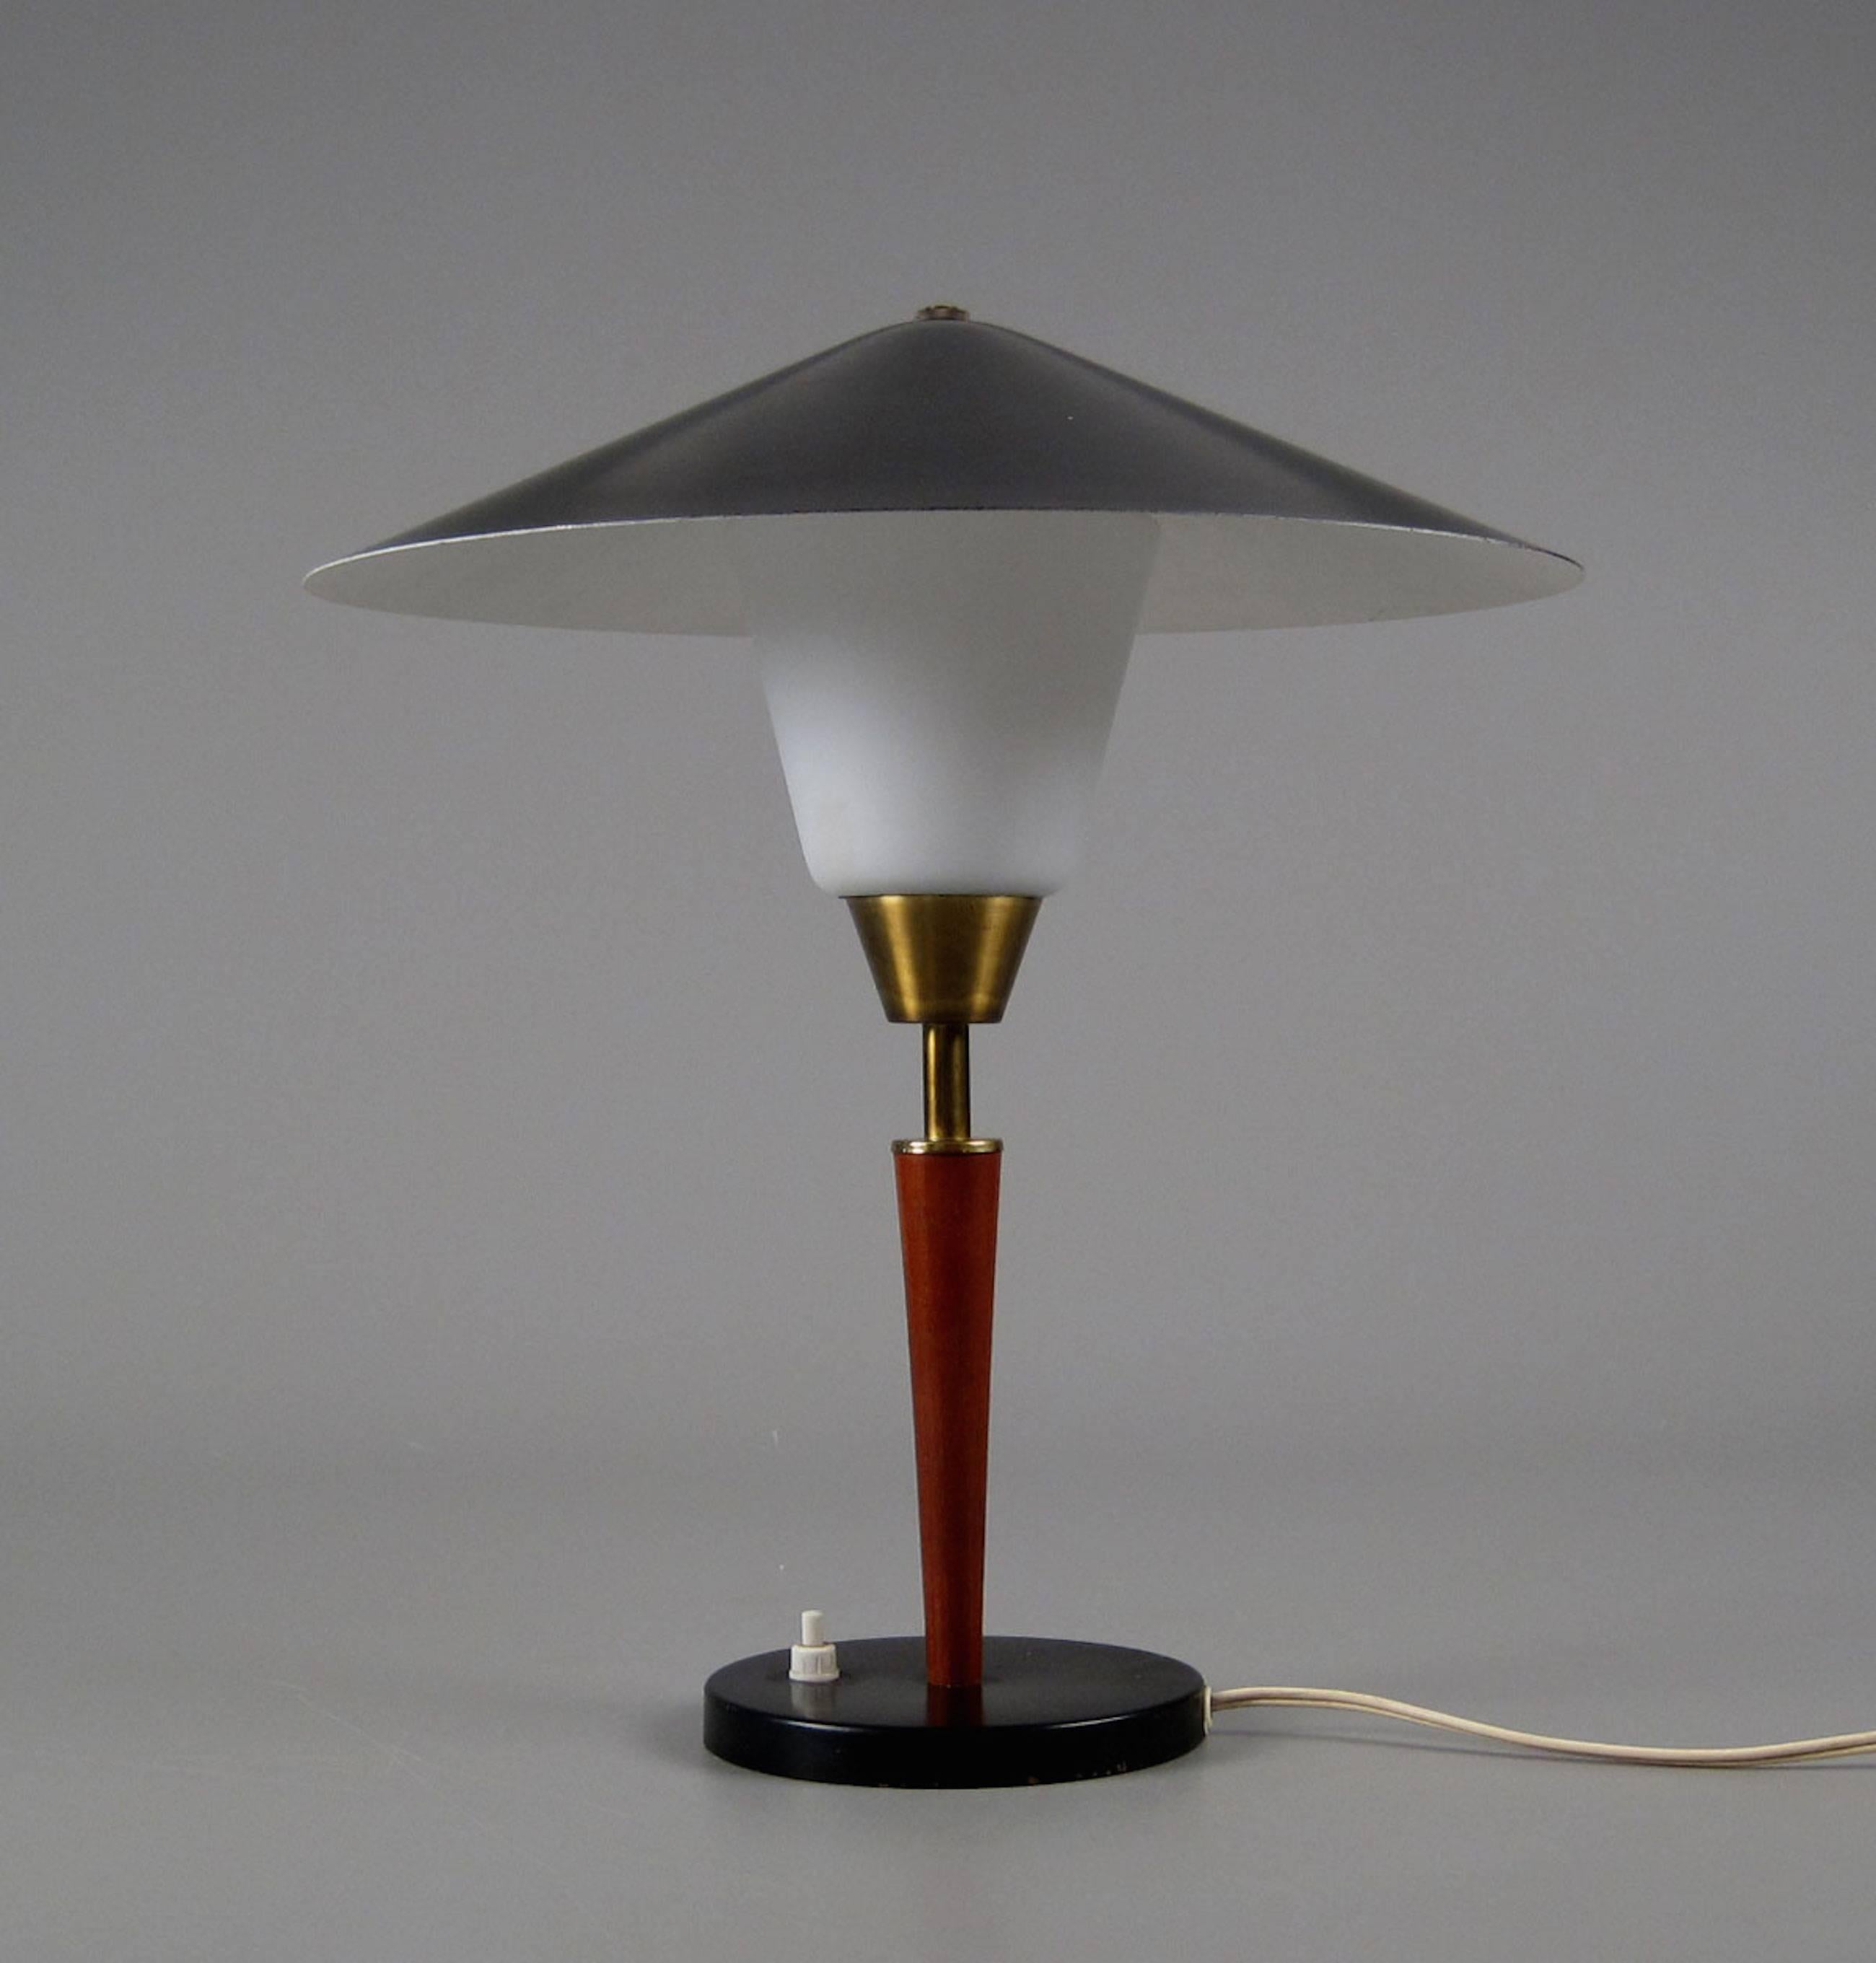 1950s desk lamp designed and manufactured by Fog & Mørup in Denmark. Black metal base and shade with reflective white interior over a conical inner-shade in opaline glass. Stem in teak and slightly patinated brass. Fine intact 1950s condition with